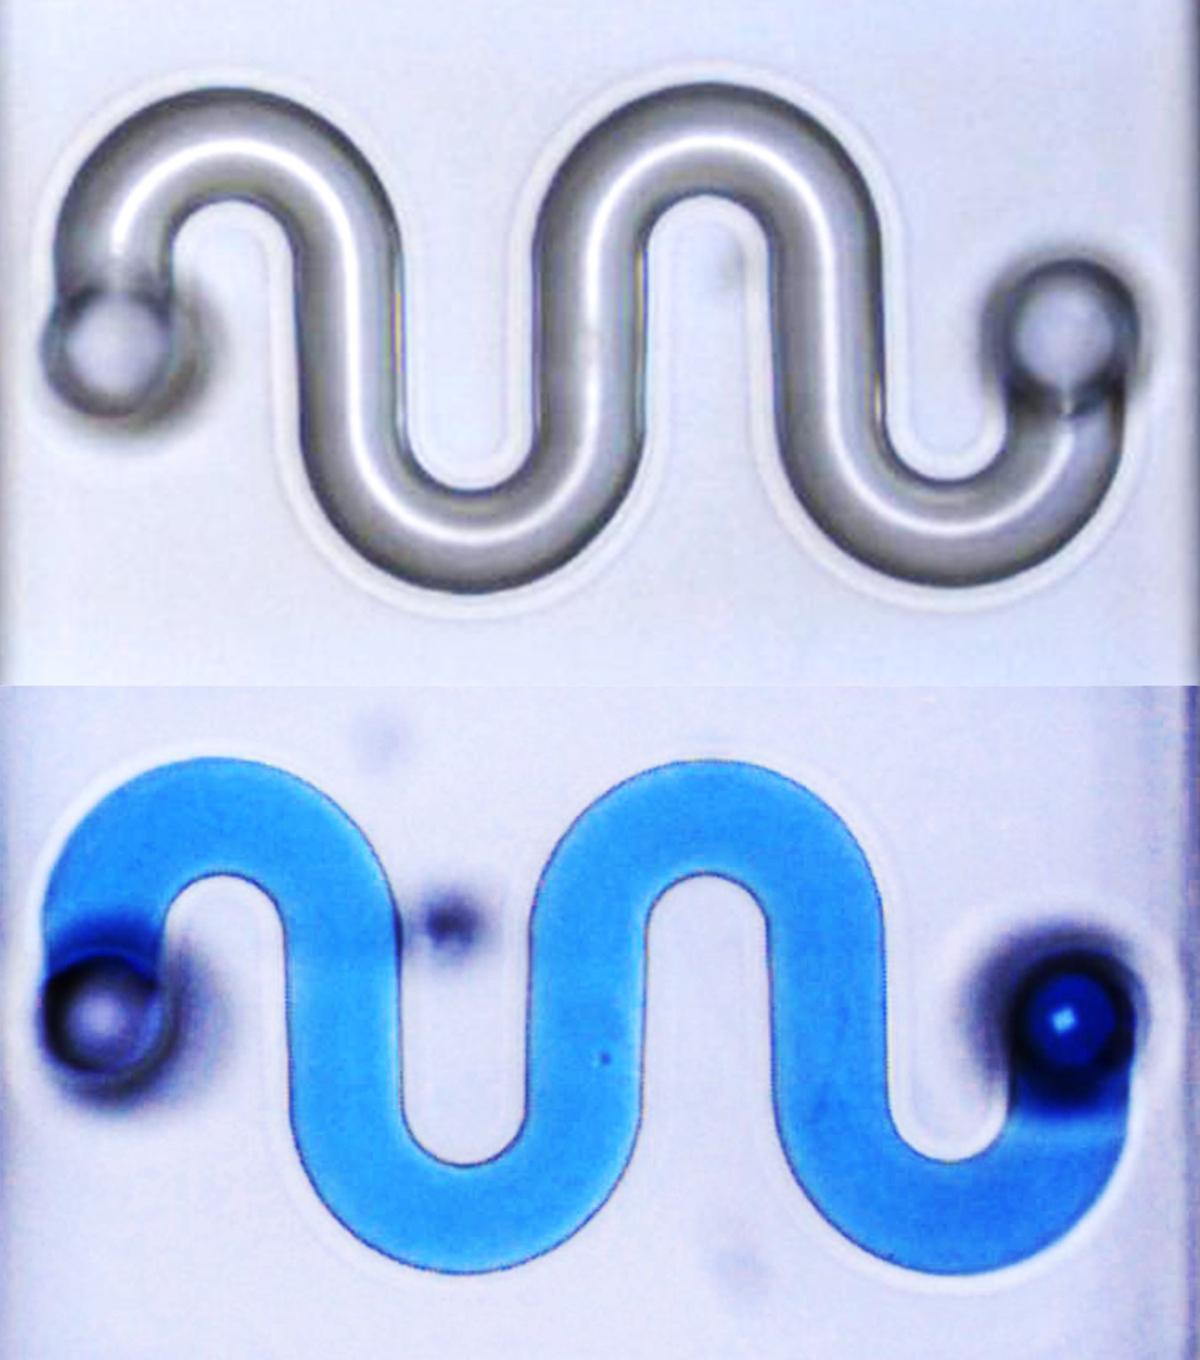 a 3D printed glass microfluidic channel in a serpentine shape, shown both hollow and filled with liquid